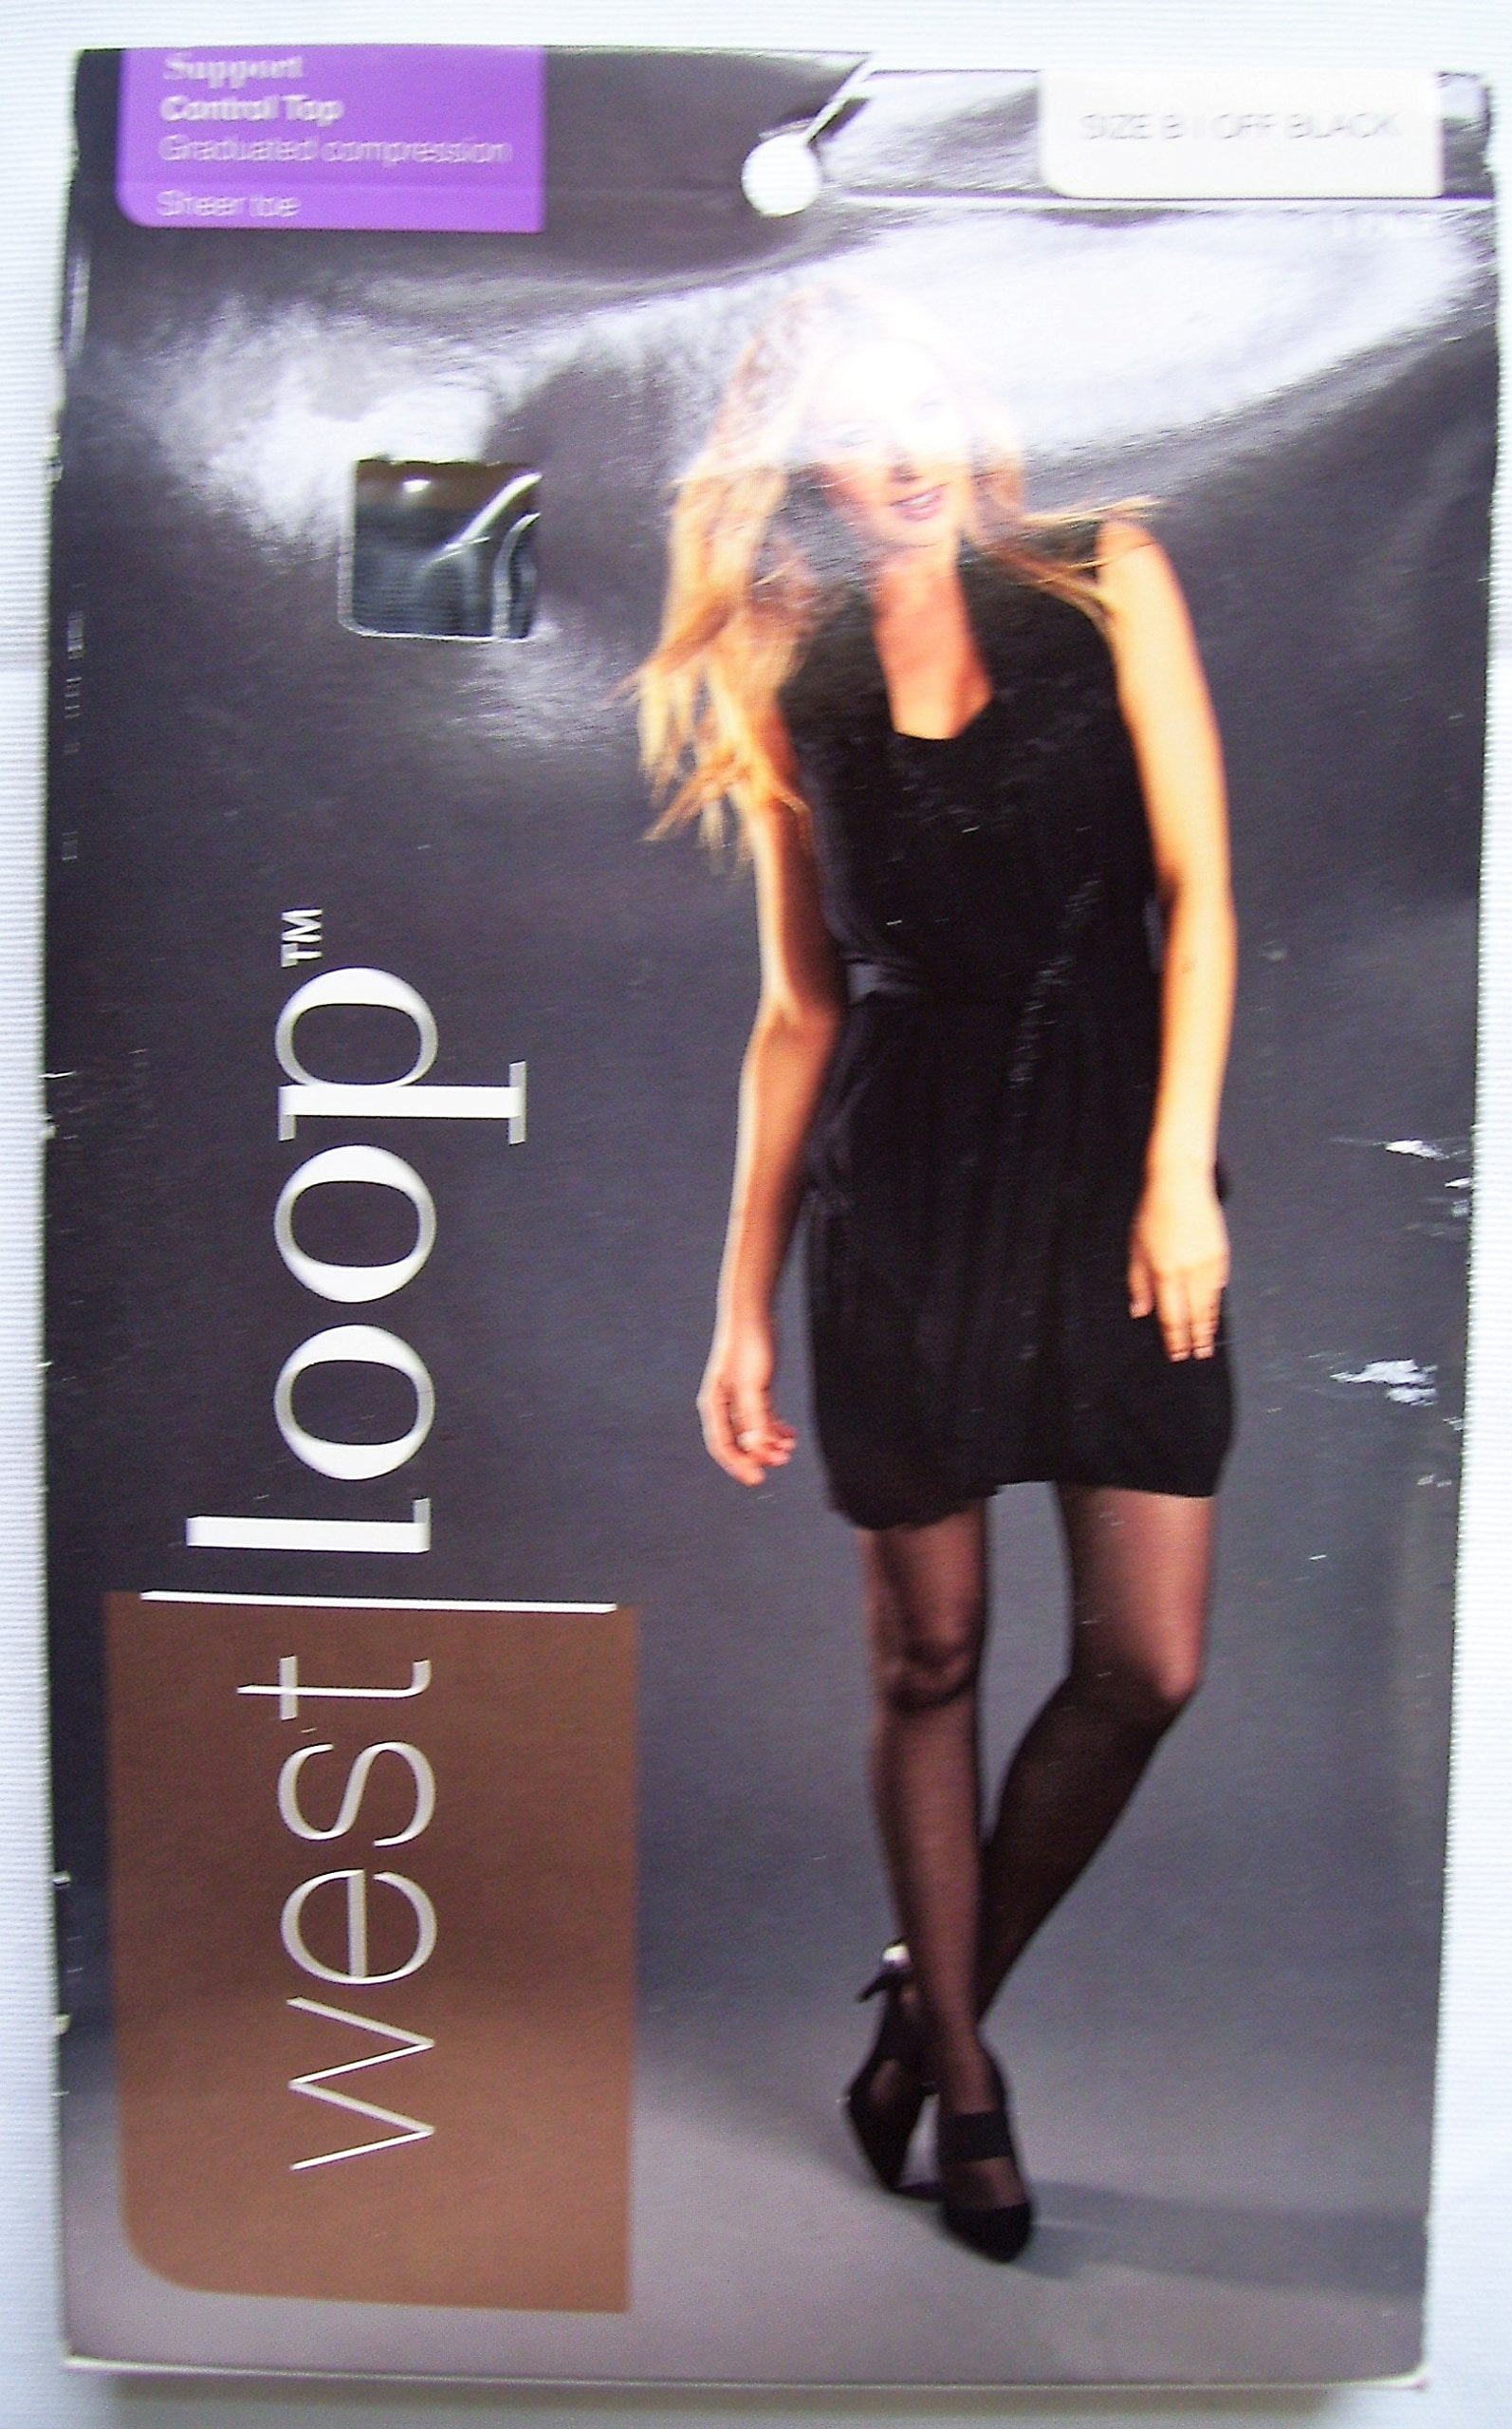 NEW LADY'S WEST LOOP KNEE HIGH NYLONS with CONTROL TOP & SHEER TOE PLUS SIZE 1 